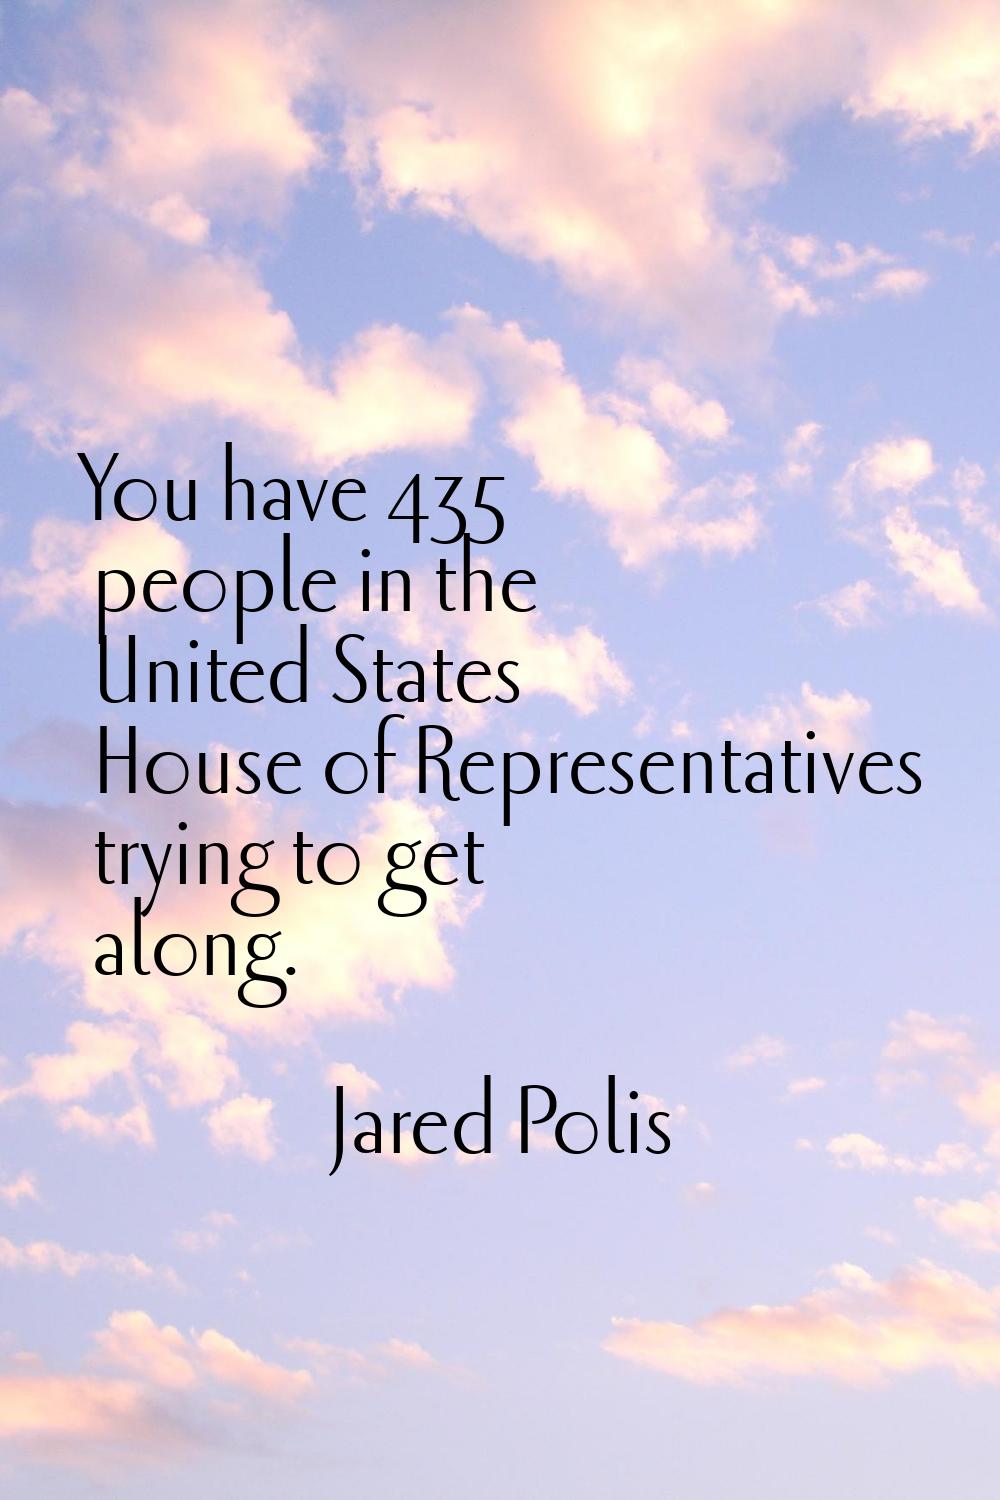 You have 435 people in the United States House of Representatives trying to get along.